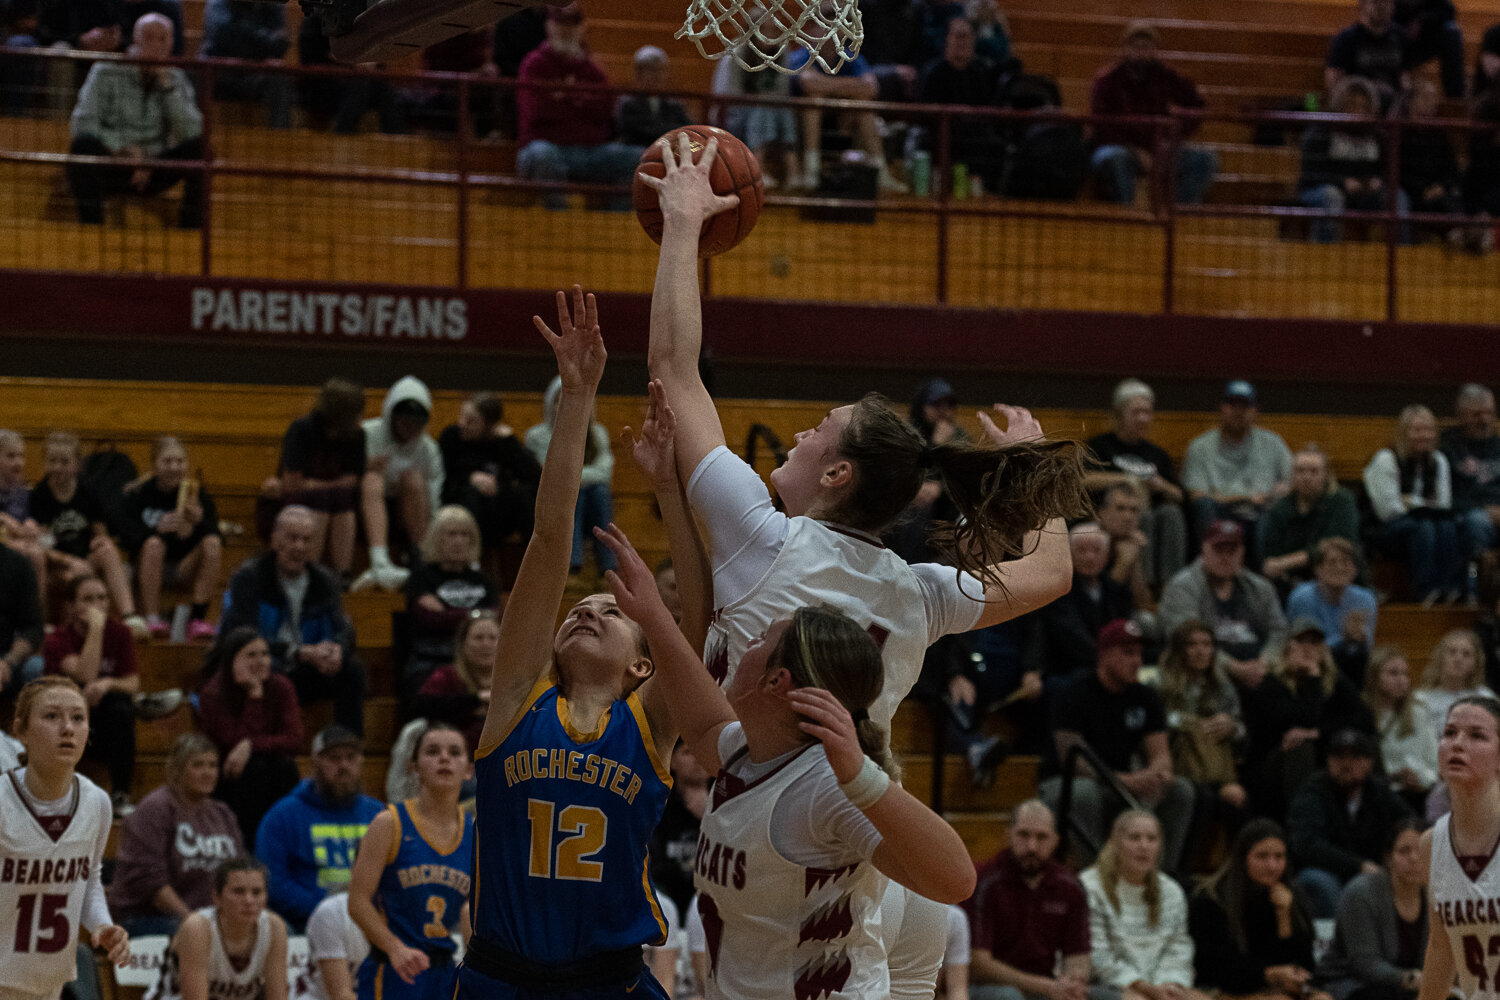 Julia Dalan blocks a shot during W.F. West's win over Rochester on Dec. 6.